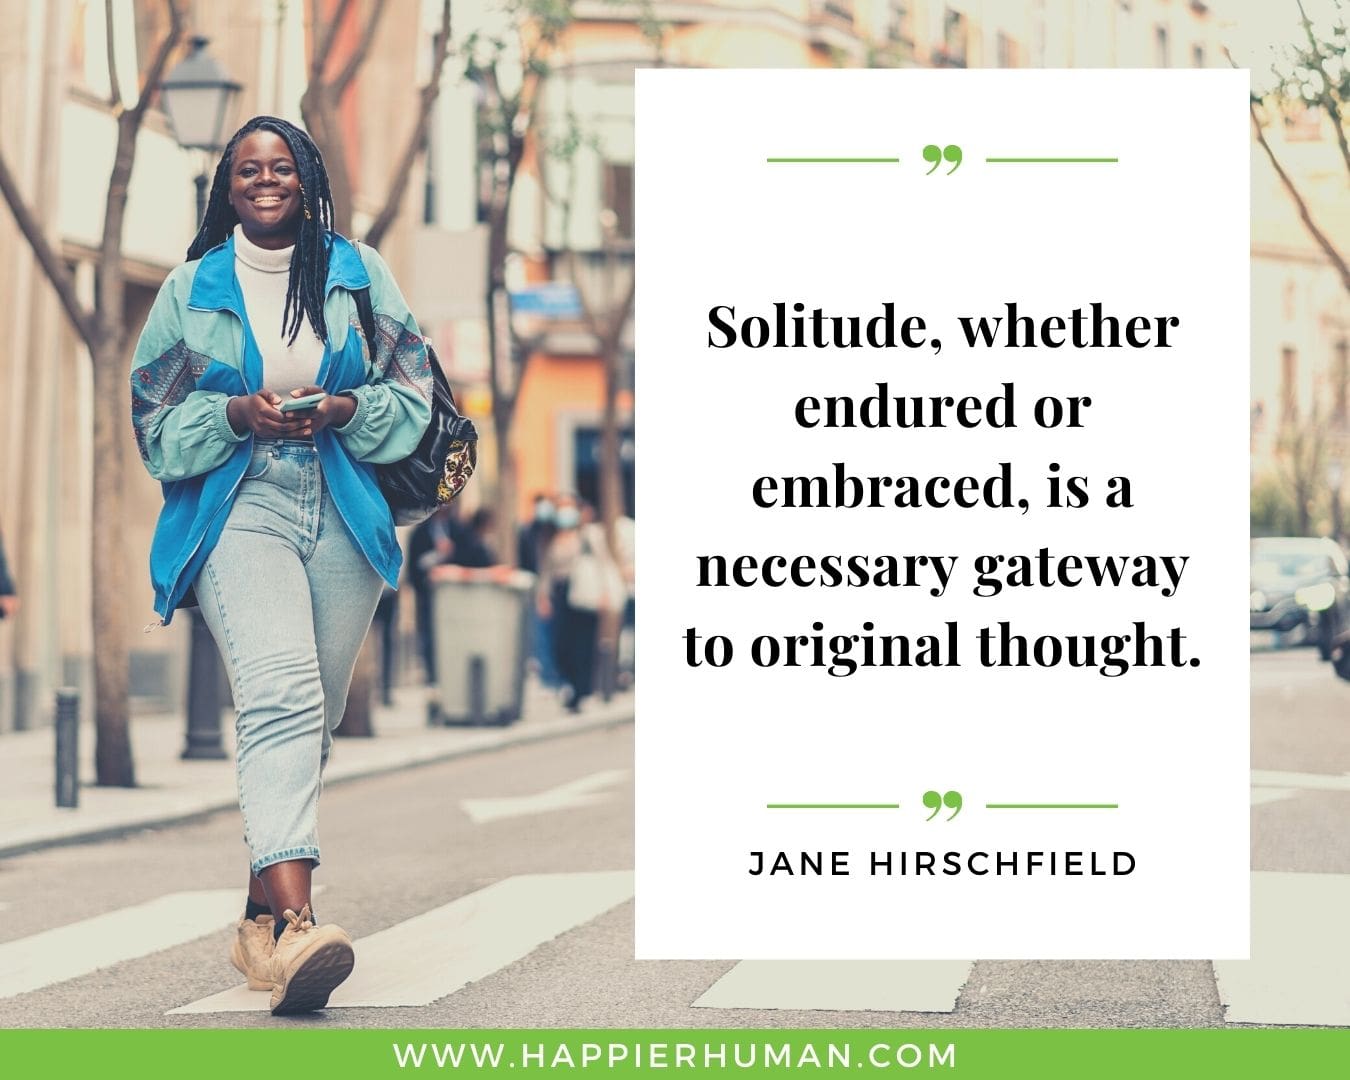 Loneliness Quotes - “Solitude, whether endured or embraced, is a necessary gateway to original thought.”– Jane Hirschfield